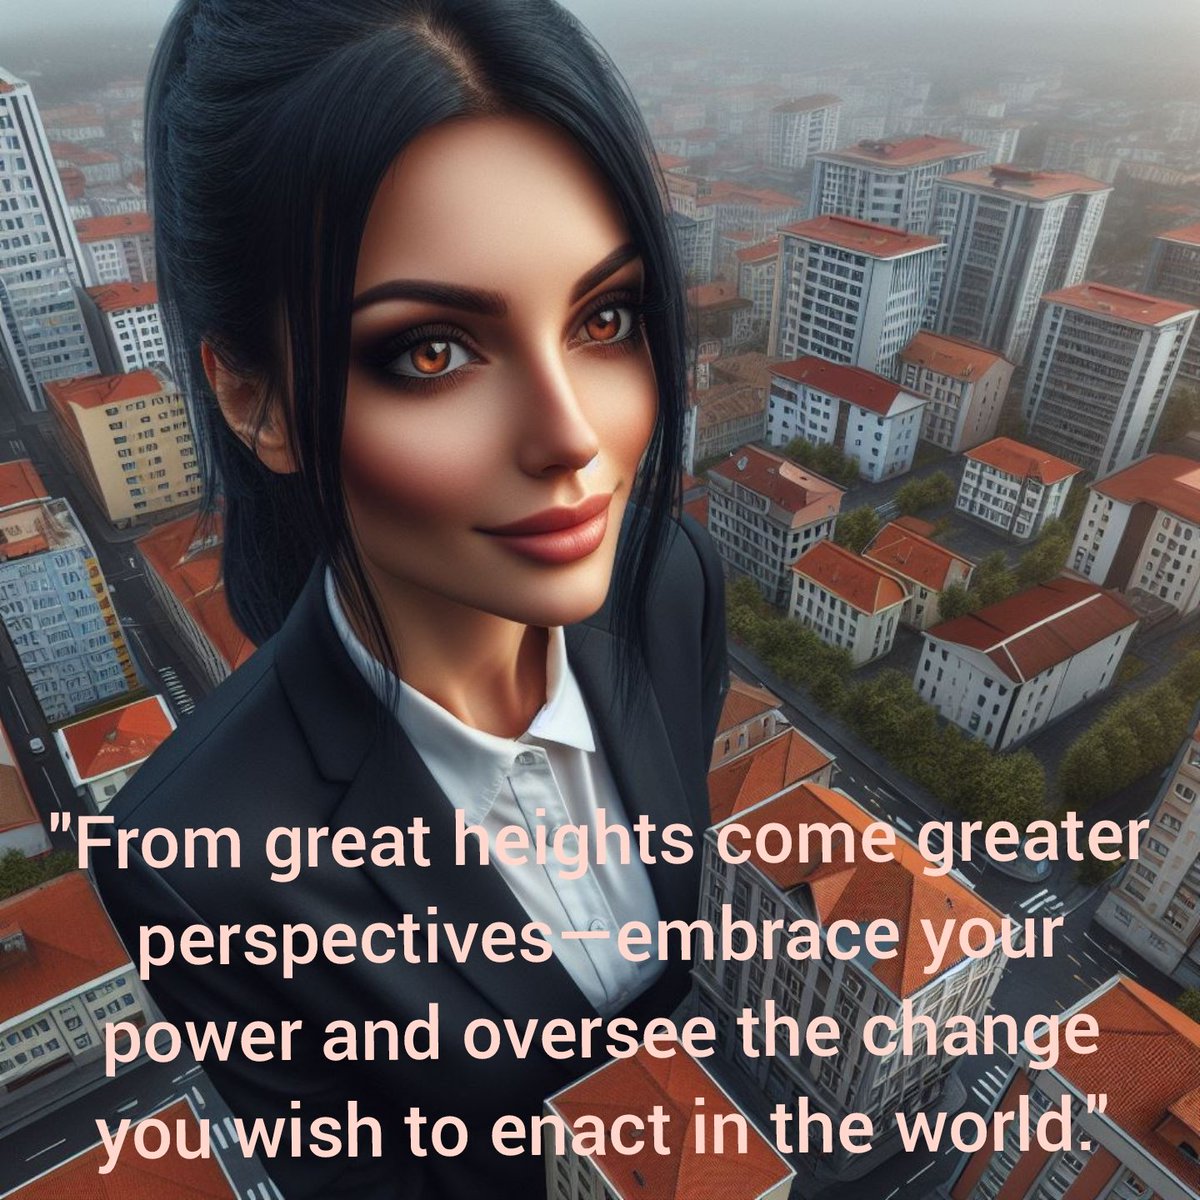 #collosalgrace #giantess #goddess #giant #giantwoman #tall #tallgirl #tallwoman #giantessart #giantesscommunity  #giantessgirl  #giantessgrowth #ai #chatgpt #aiimage
#aiart #aiartcommunity #aiartists #fyp #foryoupage
#mindset #femaleempowerment #motivation #mindset #affirmation